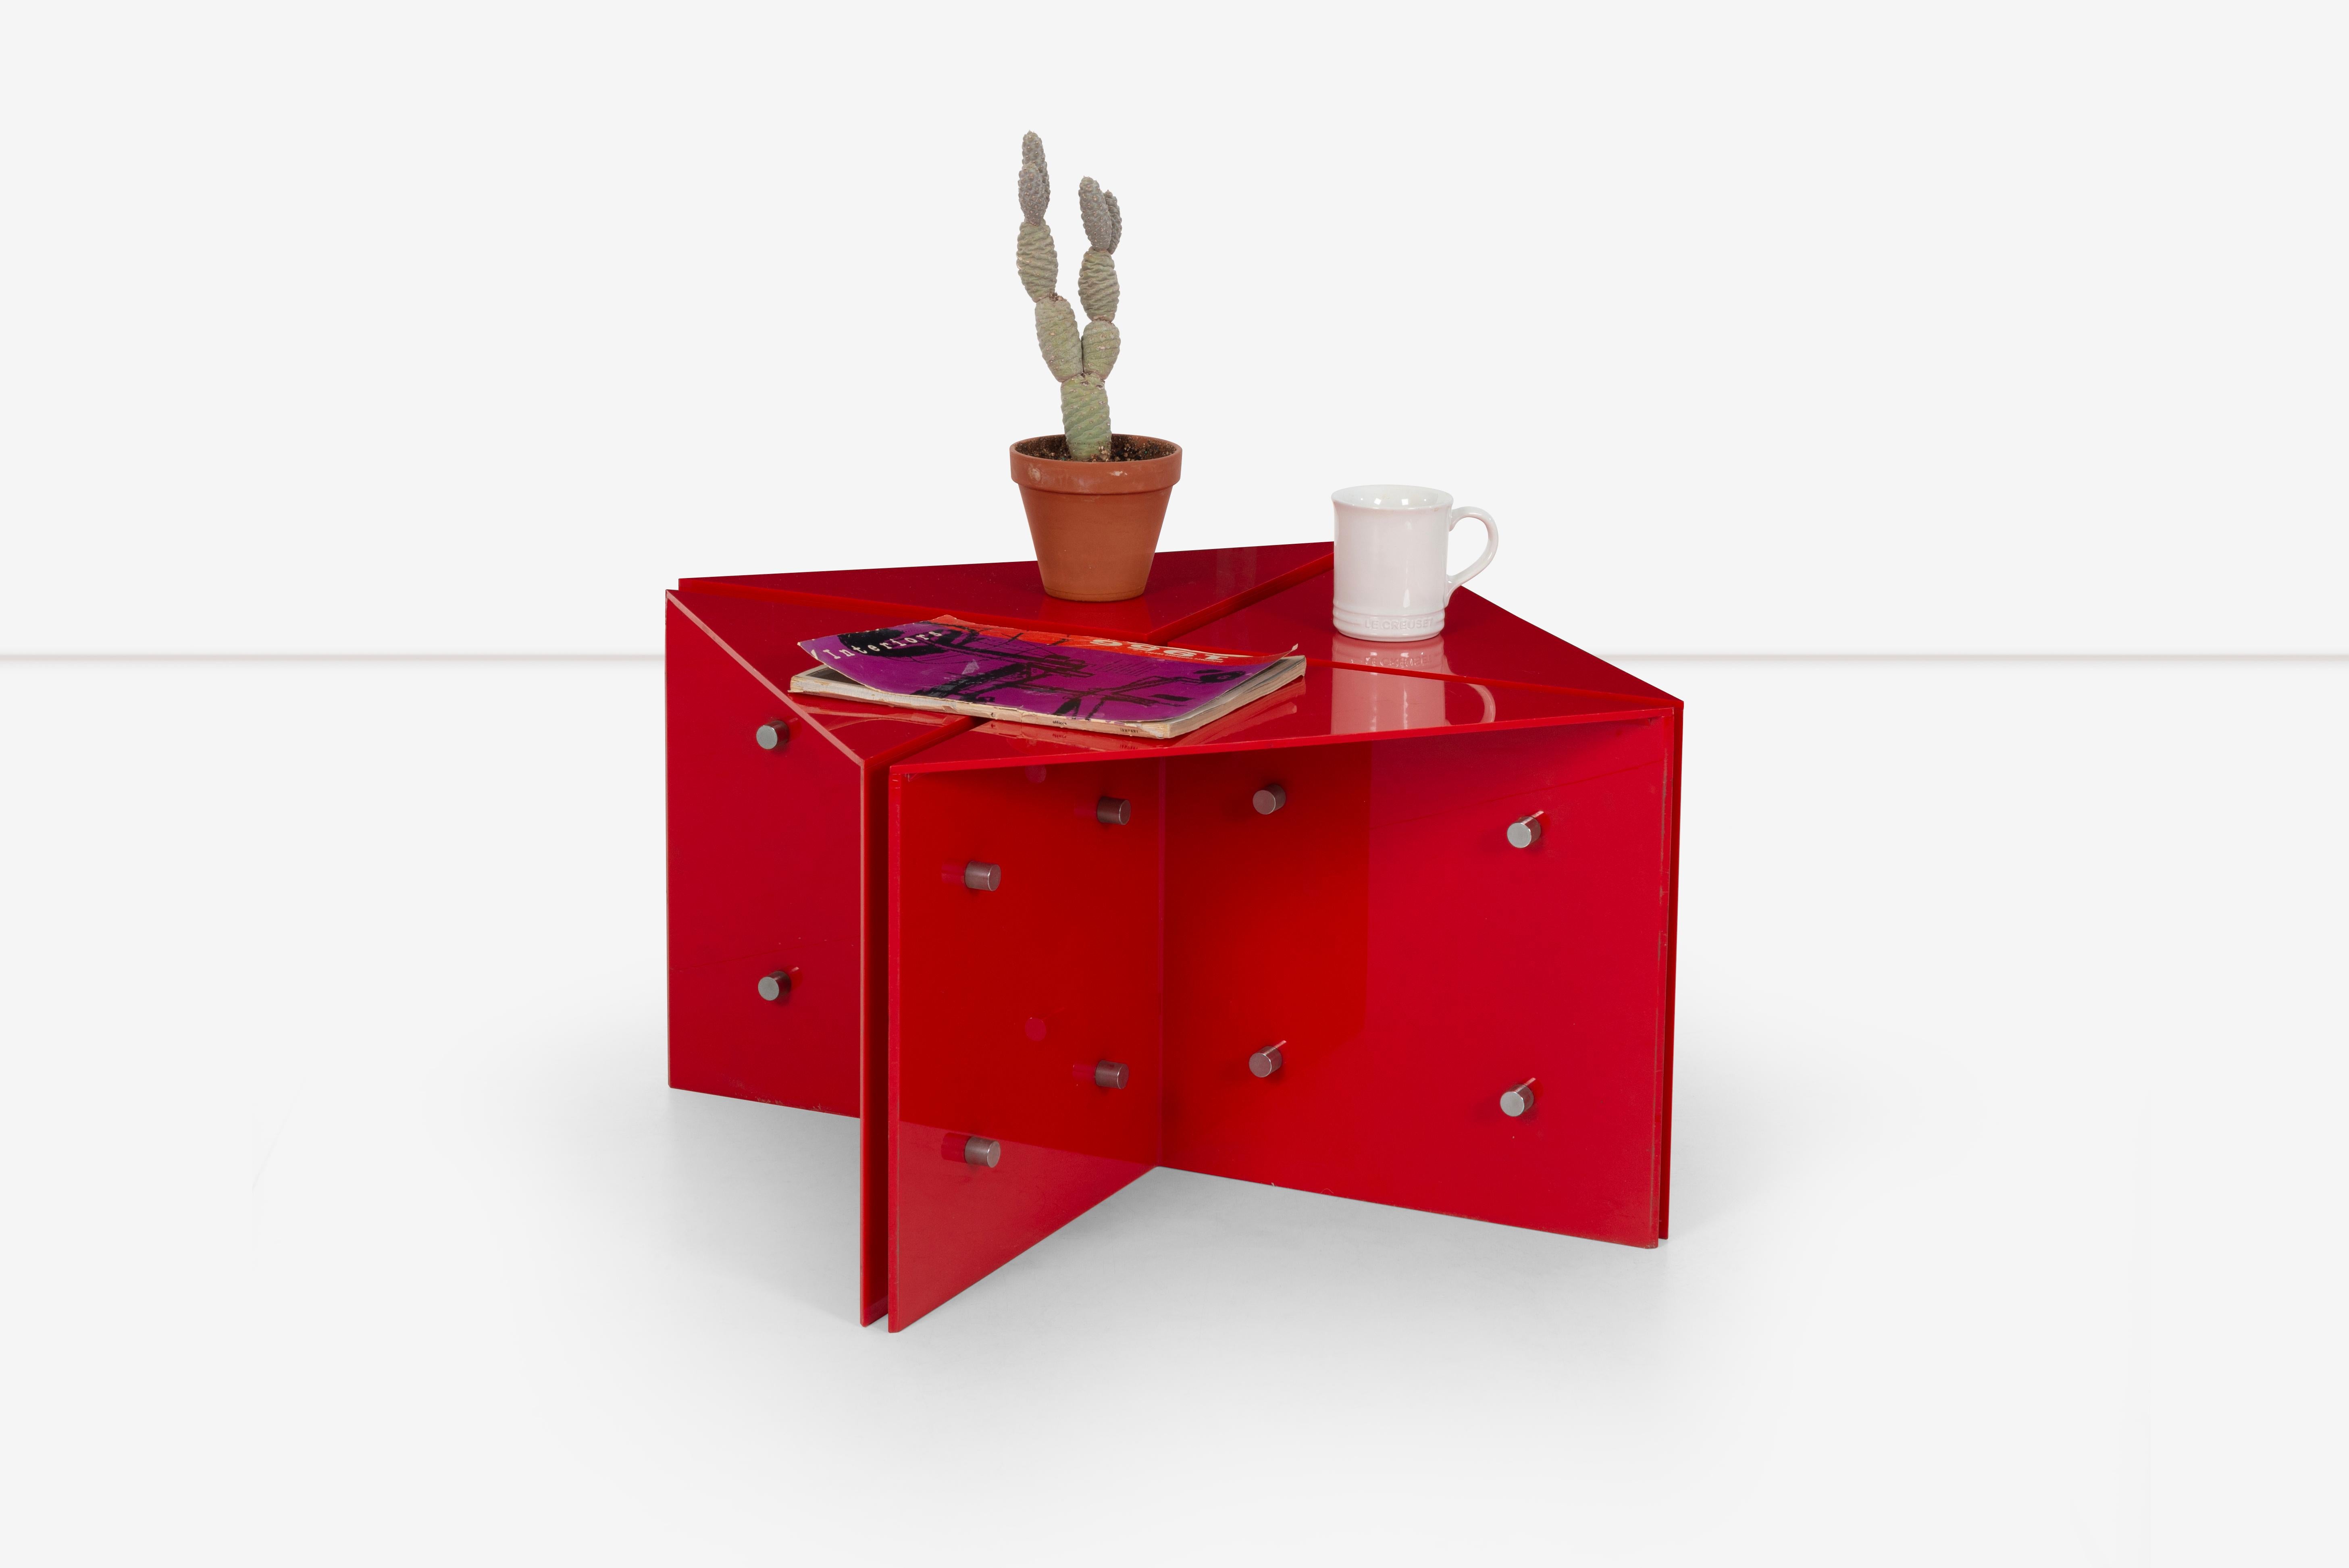 The Neal Small red acrylic side table is a stunning and eye-catching piece of furniture. The vibrant red color adds a pop of color to any room, creating a focal point that draws the eye. The high-quality acrylic material gives the table a sleek and